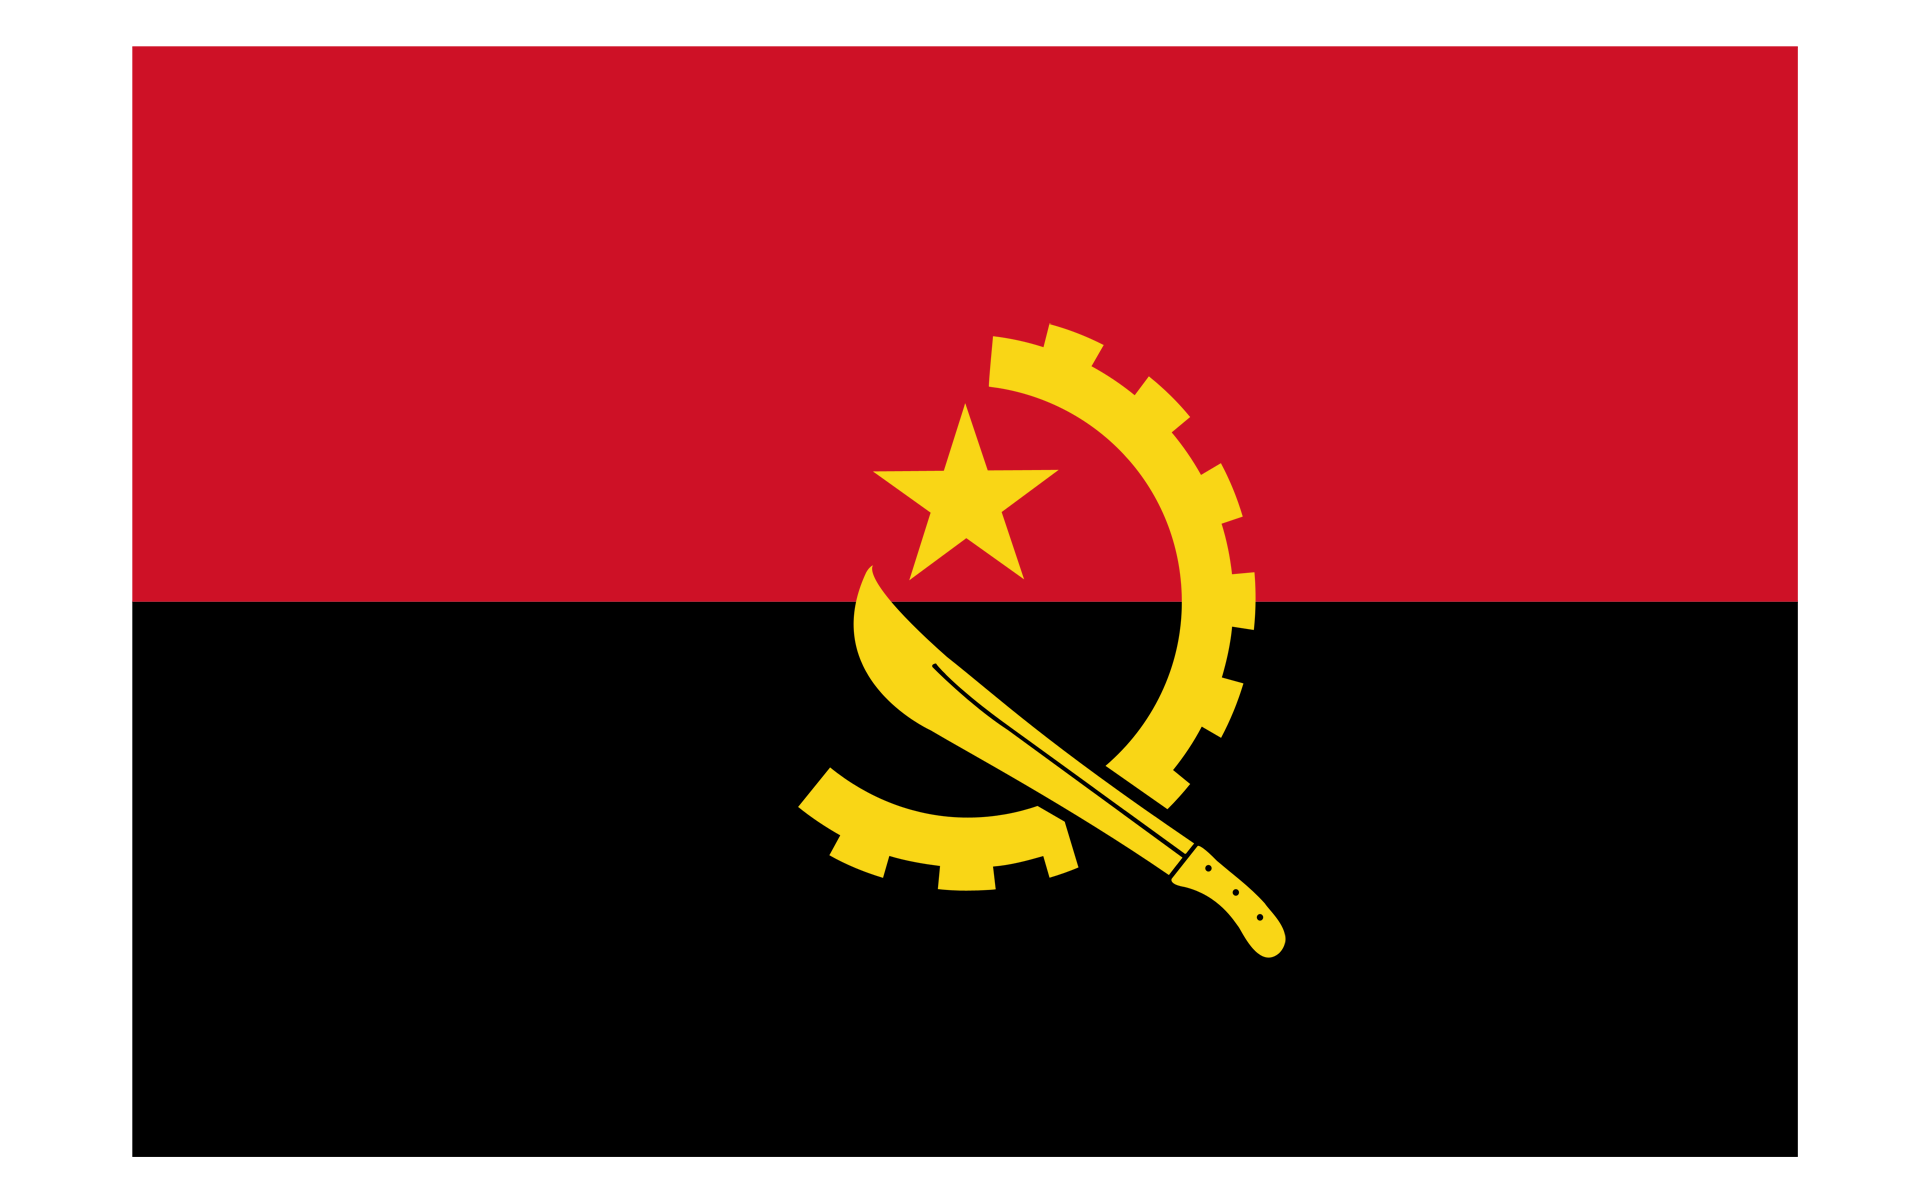 The Beauty Of Angola Flag In Pictures: Download Free In HD